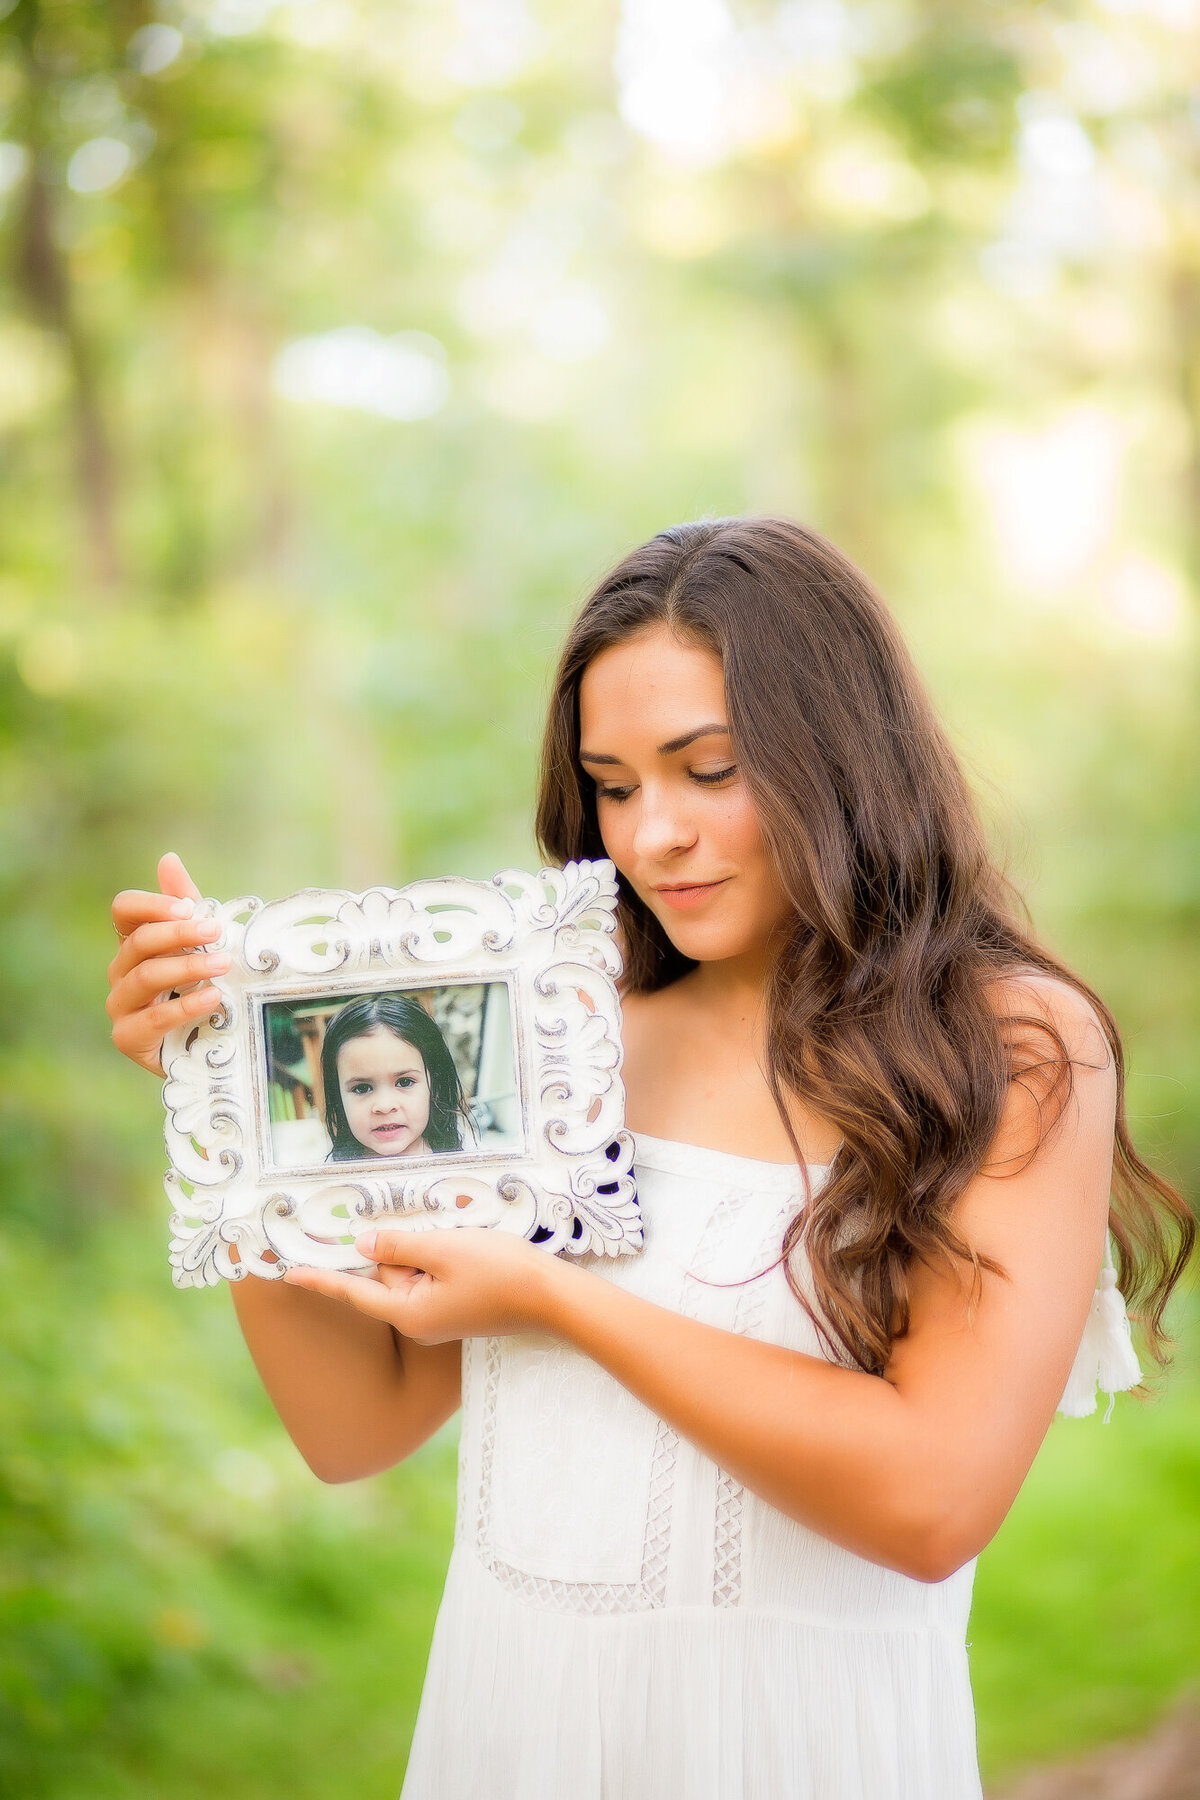 Color image of girl in white dress holding an image of herself